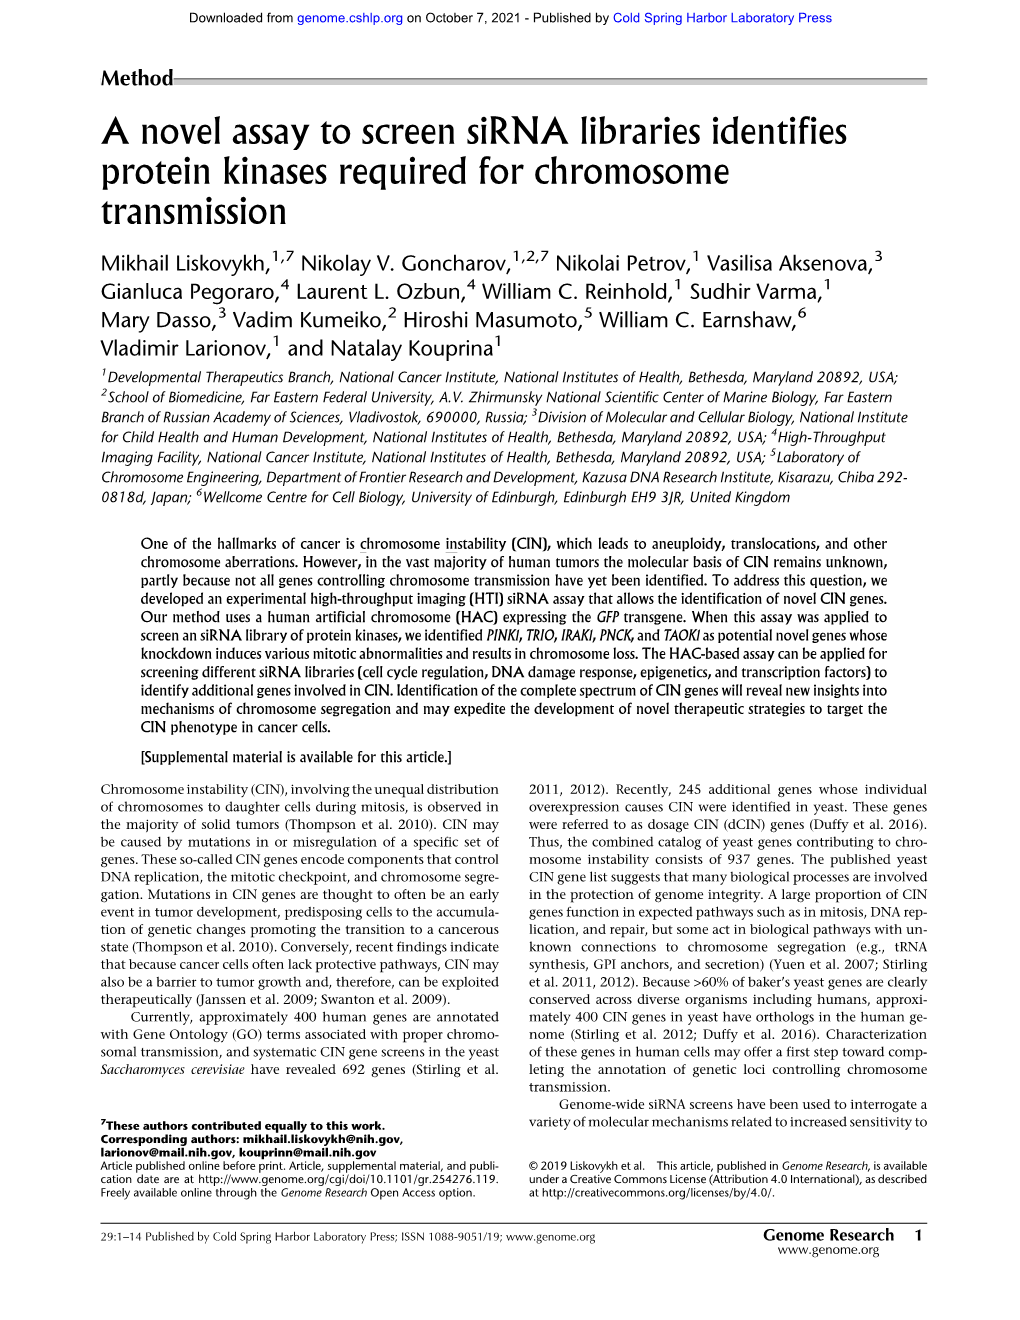 A Novel Assay to Screen Sirna Libraries Identifies Protein Kinases Required for Chromosome Transmission